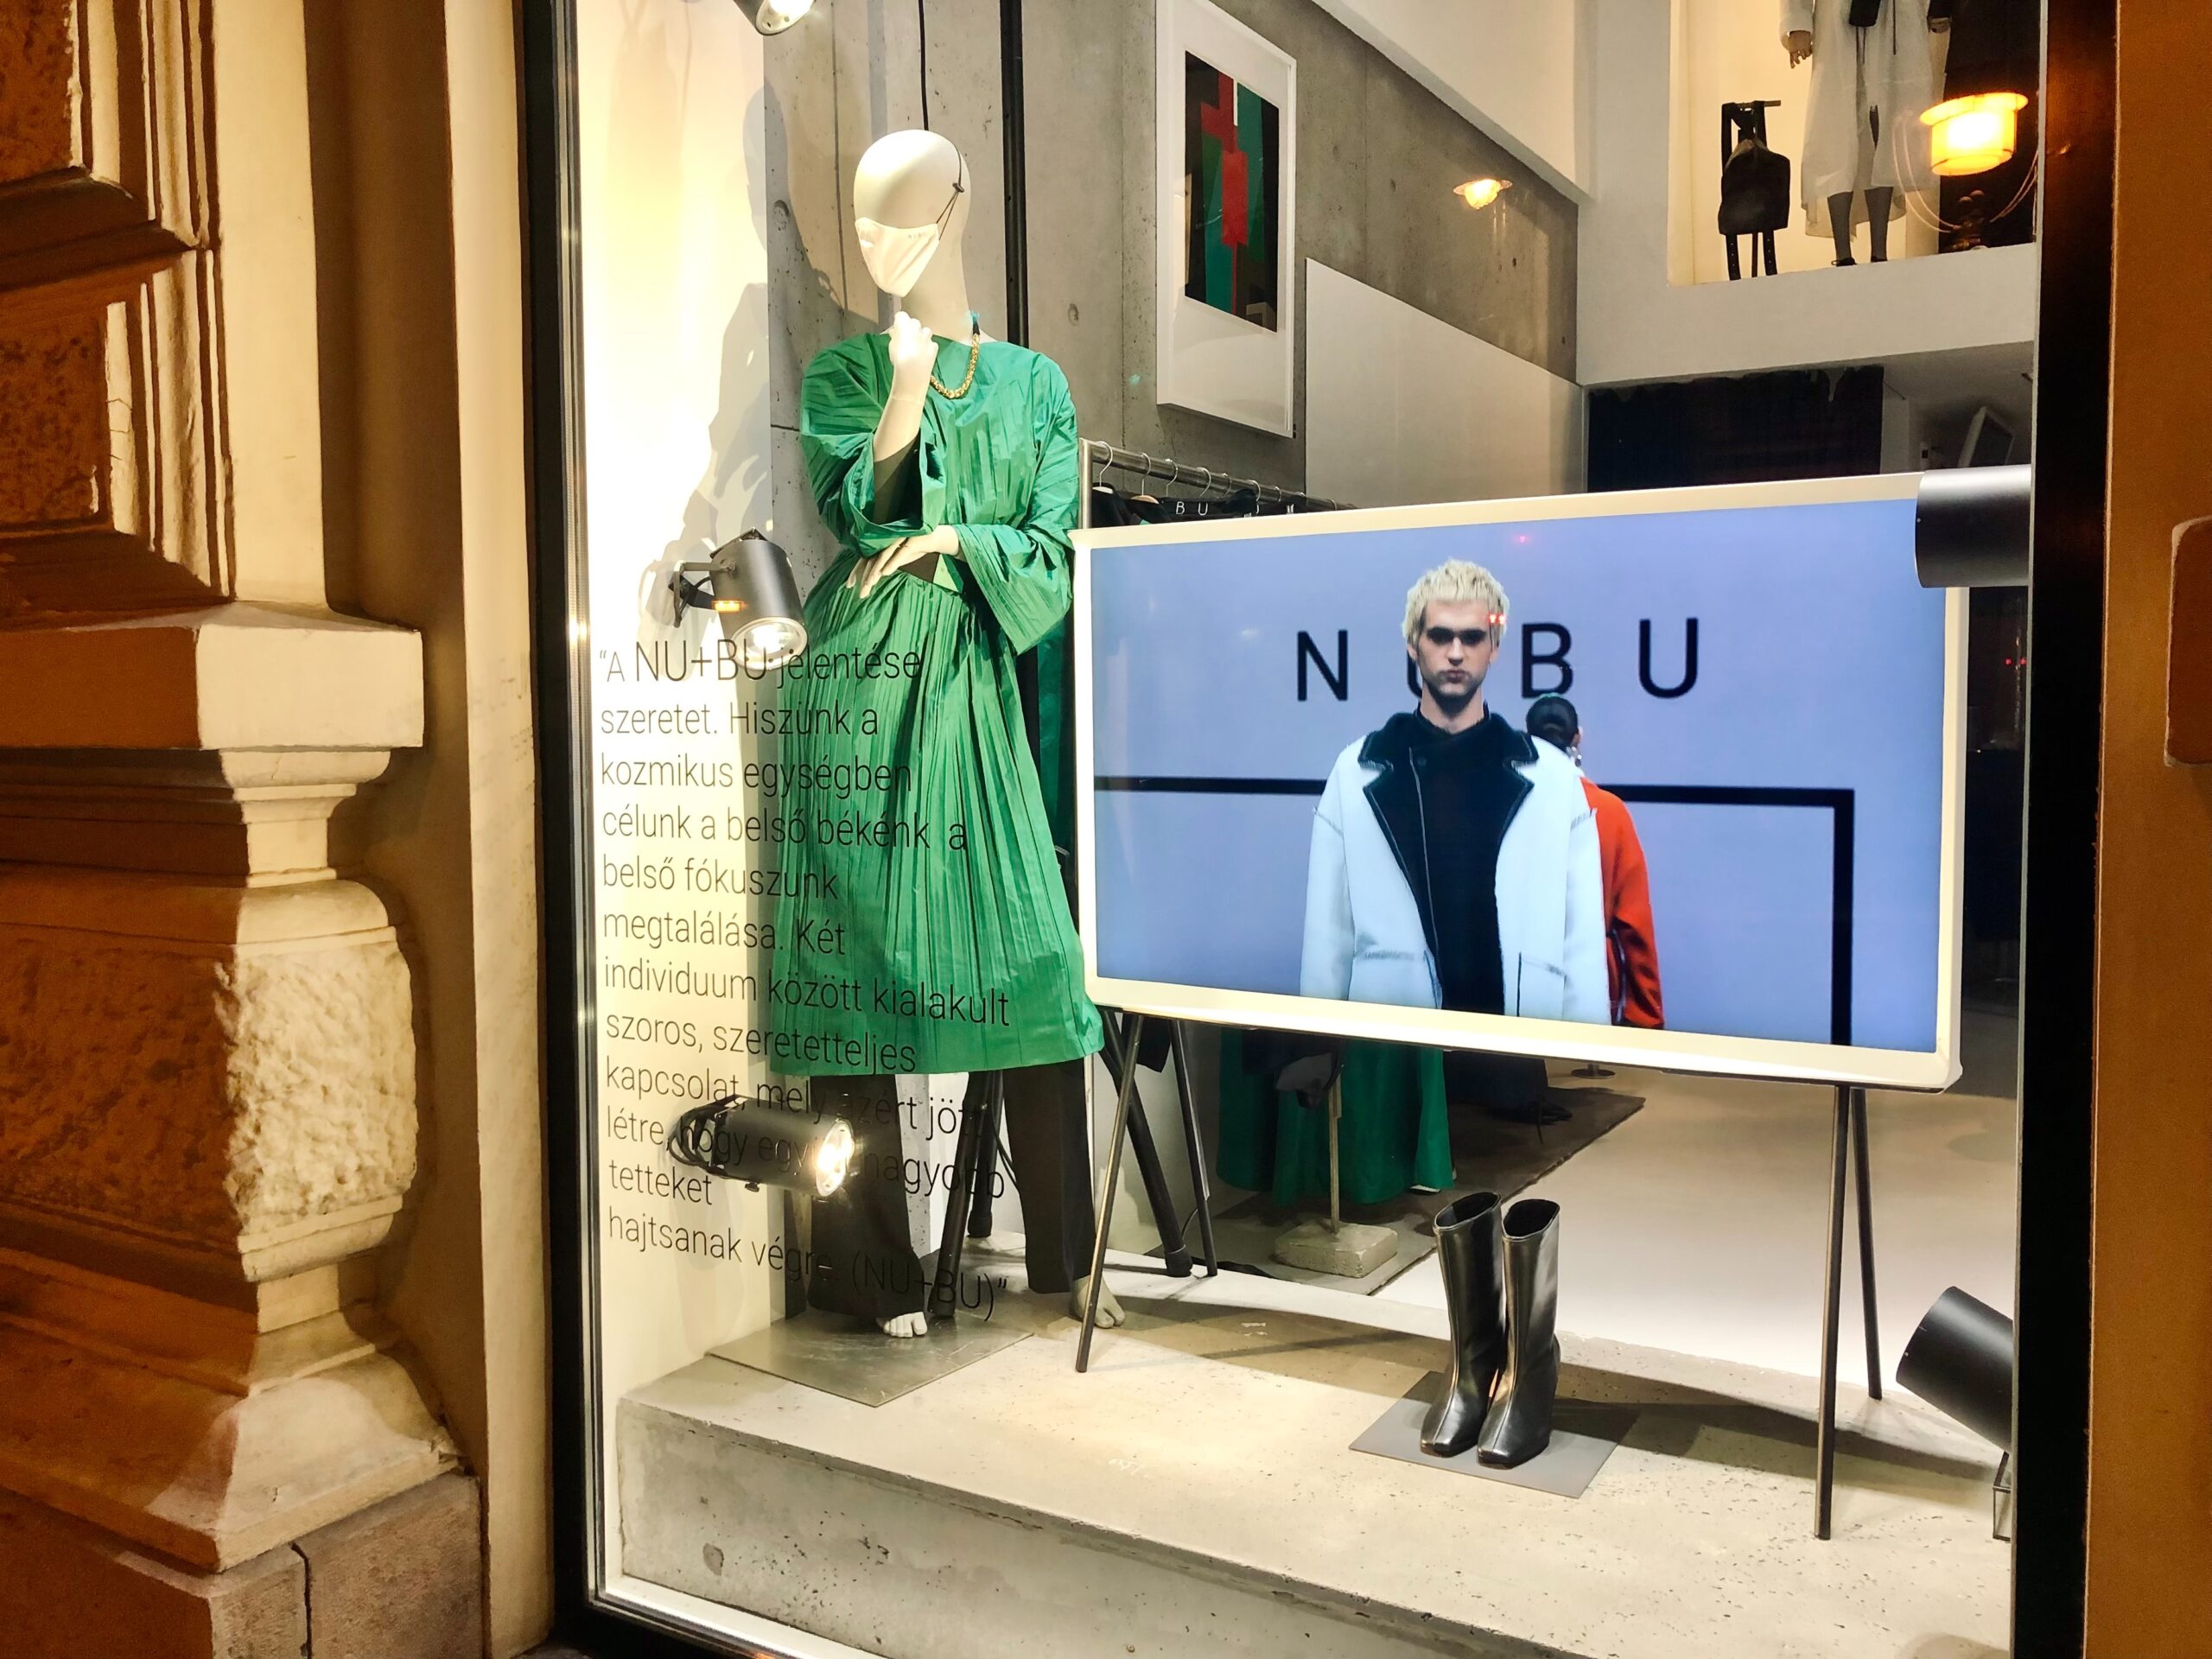 -window-display-with-mannequins-dressed-in-green-and-black